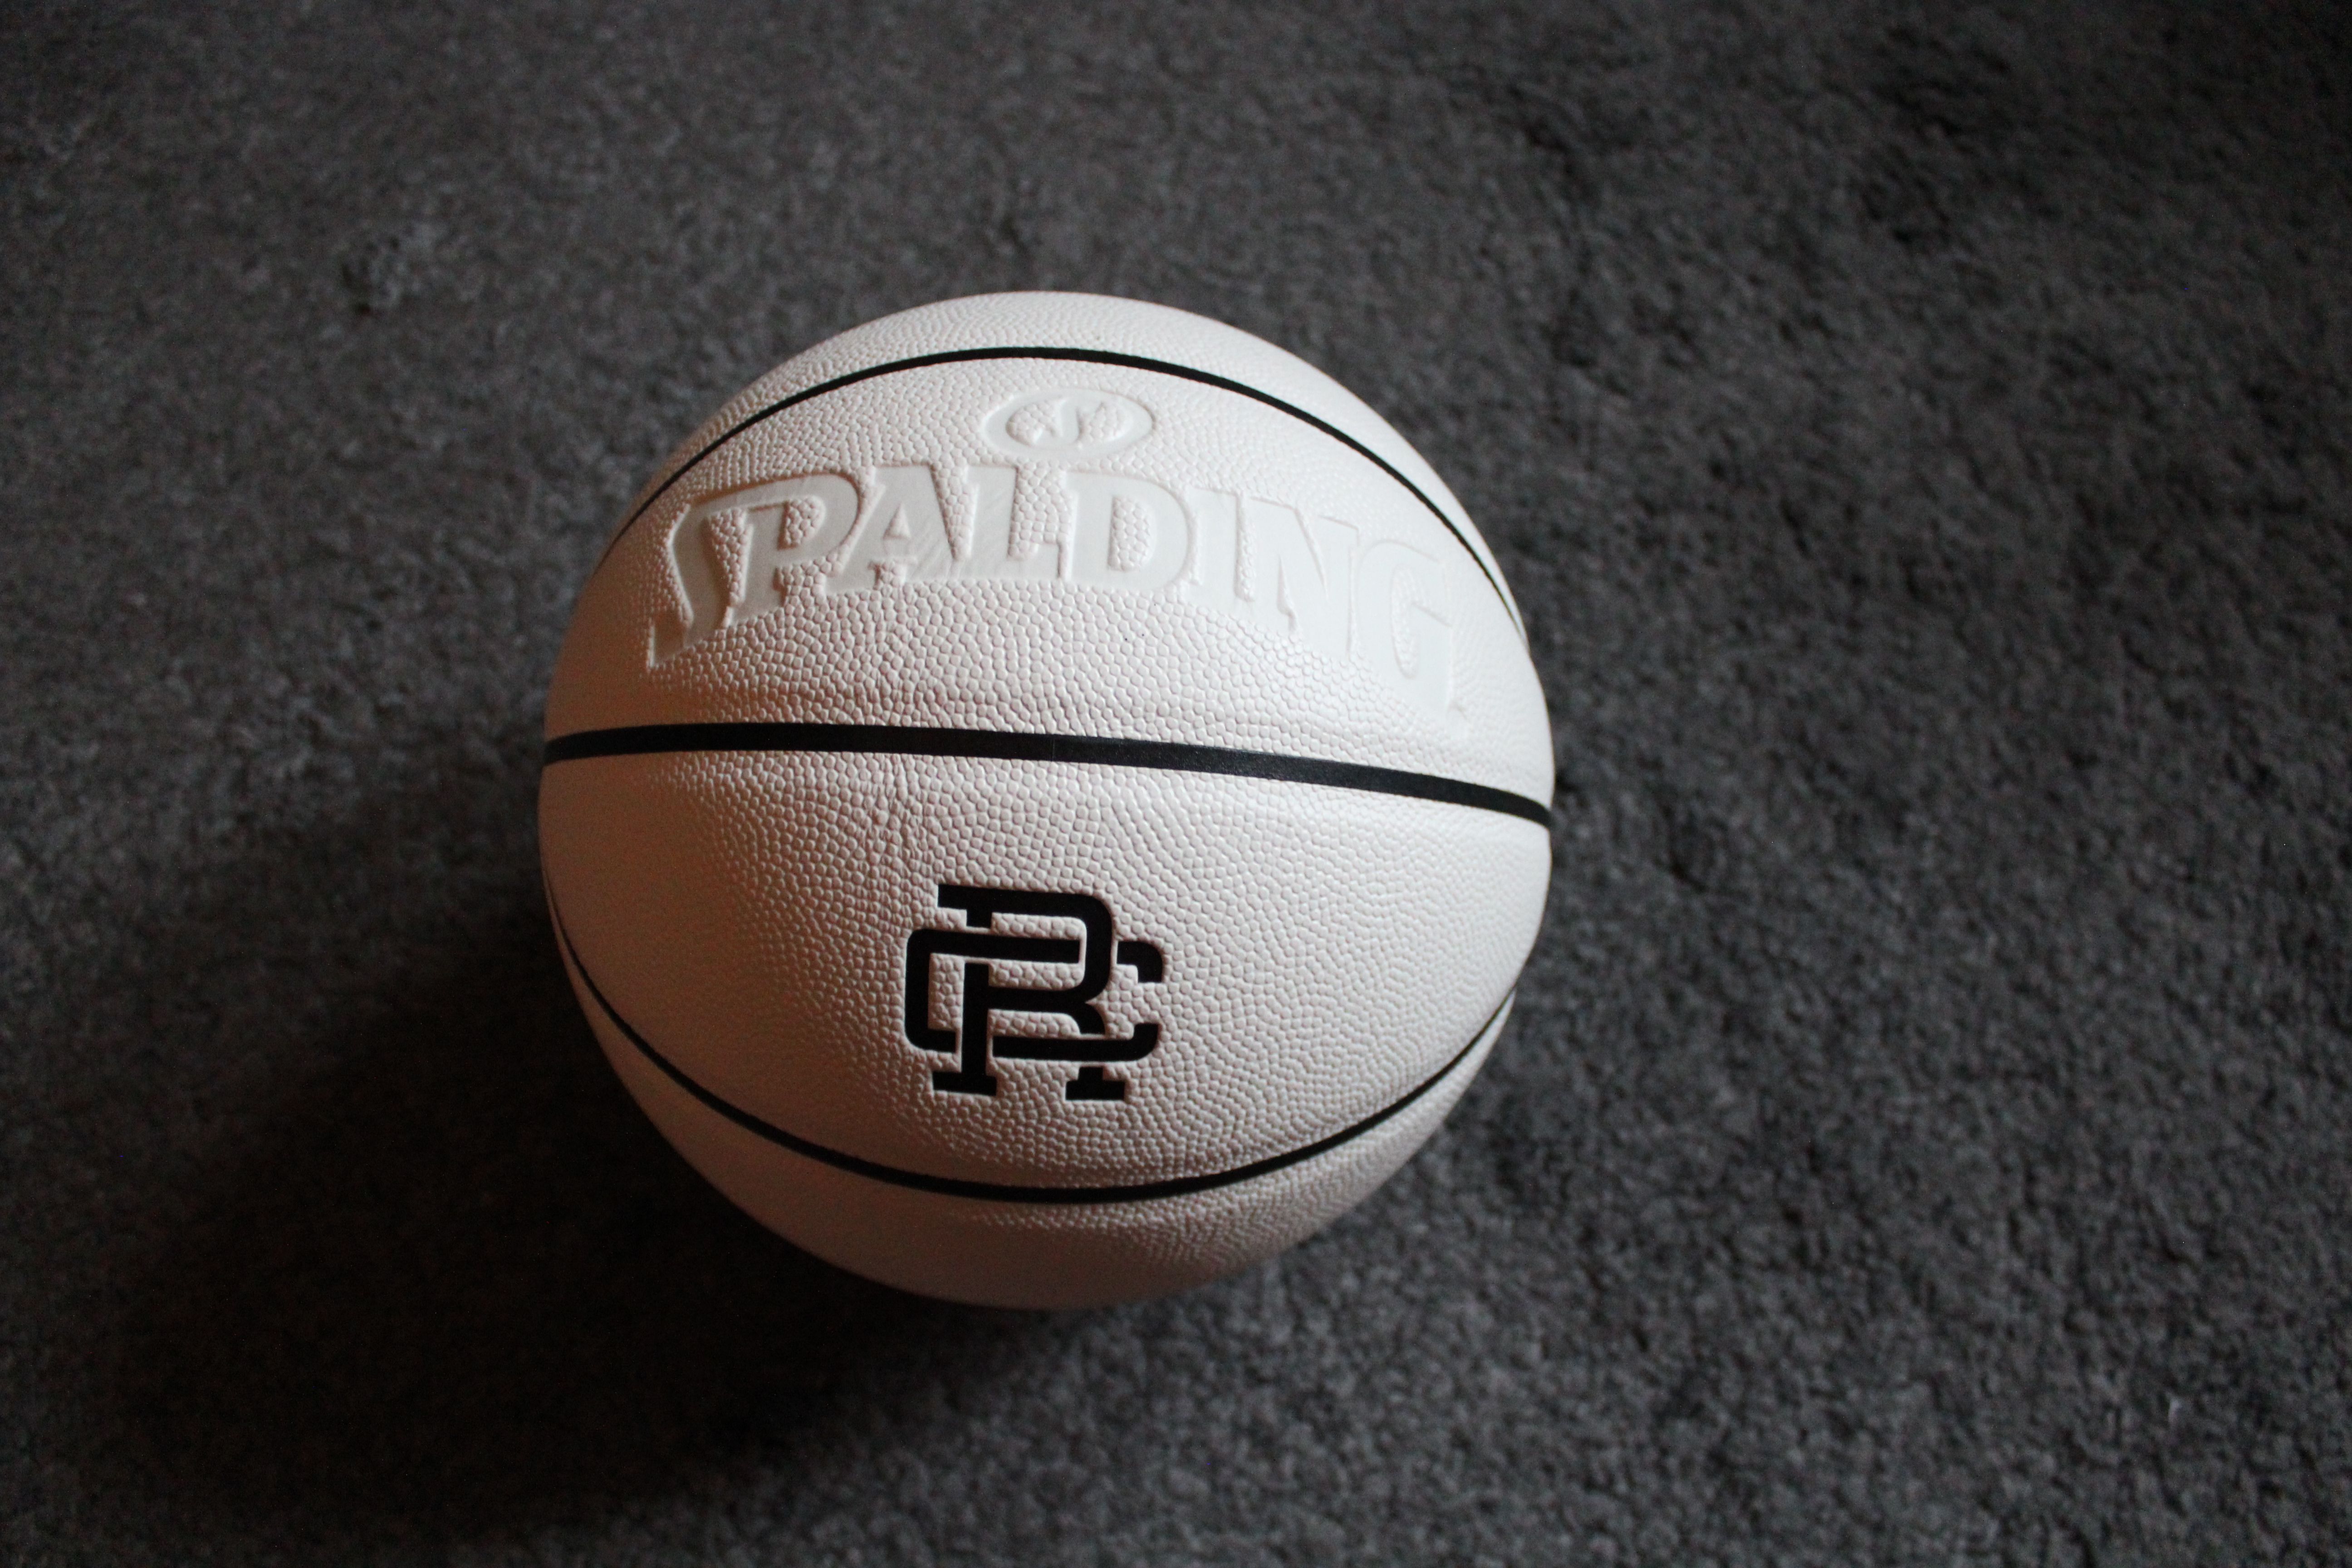 Spalding Basketball / O/S / Grey by Reigning Champ